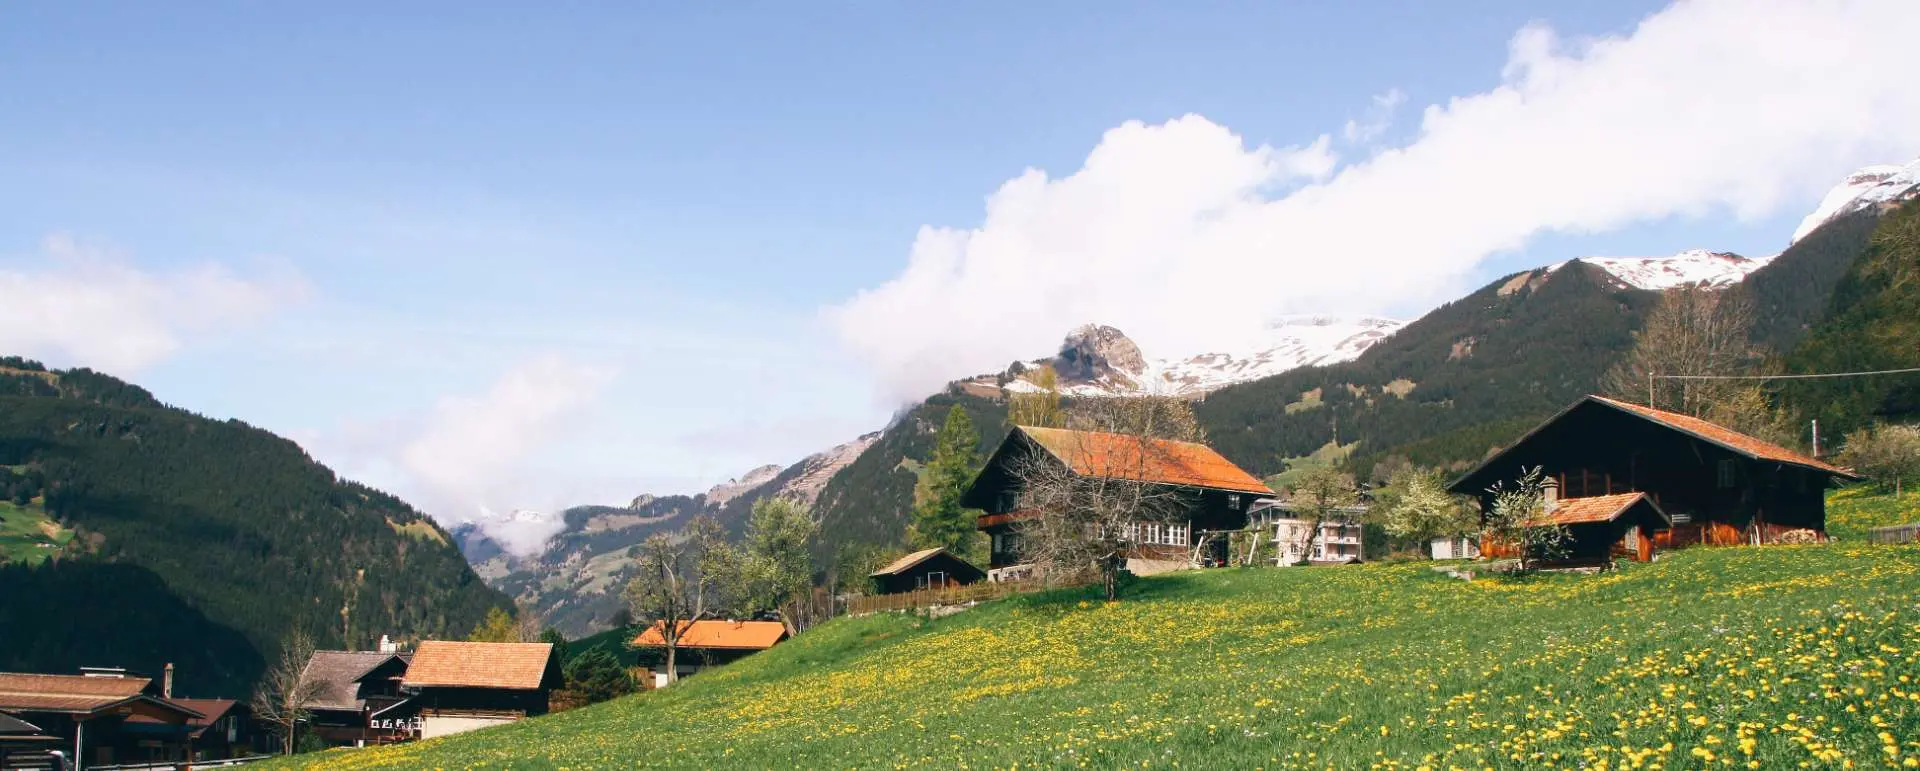 Bernese Highlands - the destination for group hotel for nature lovers